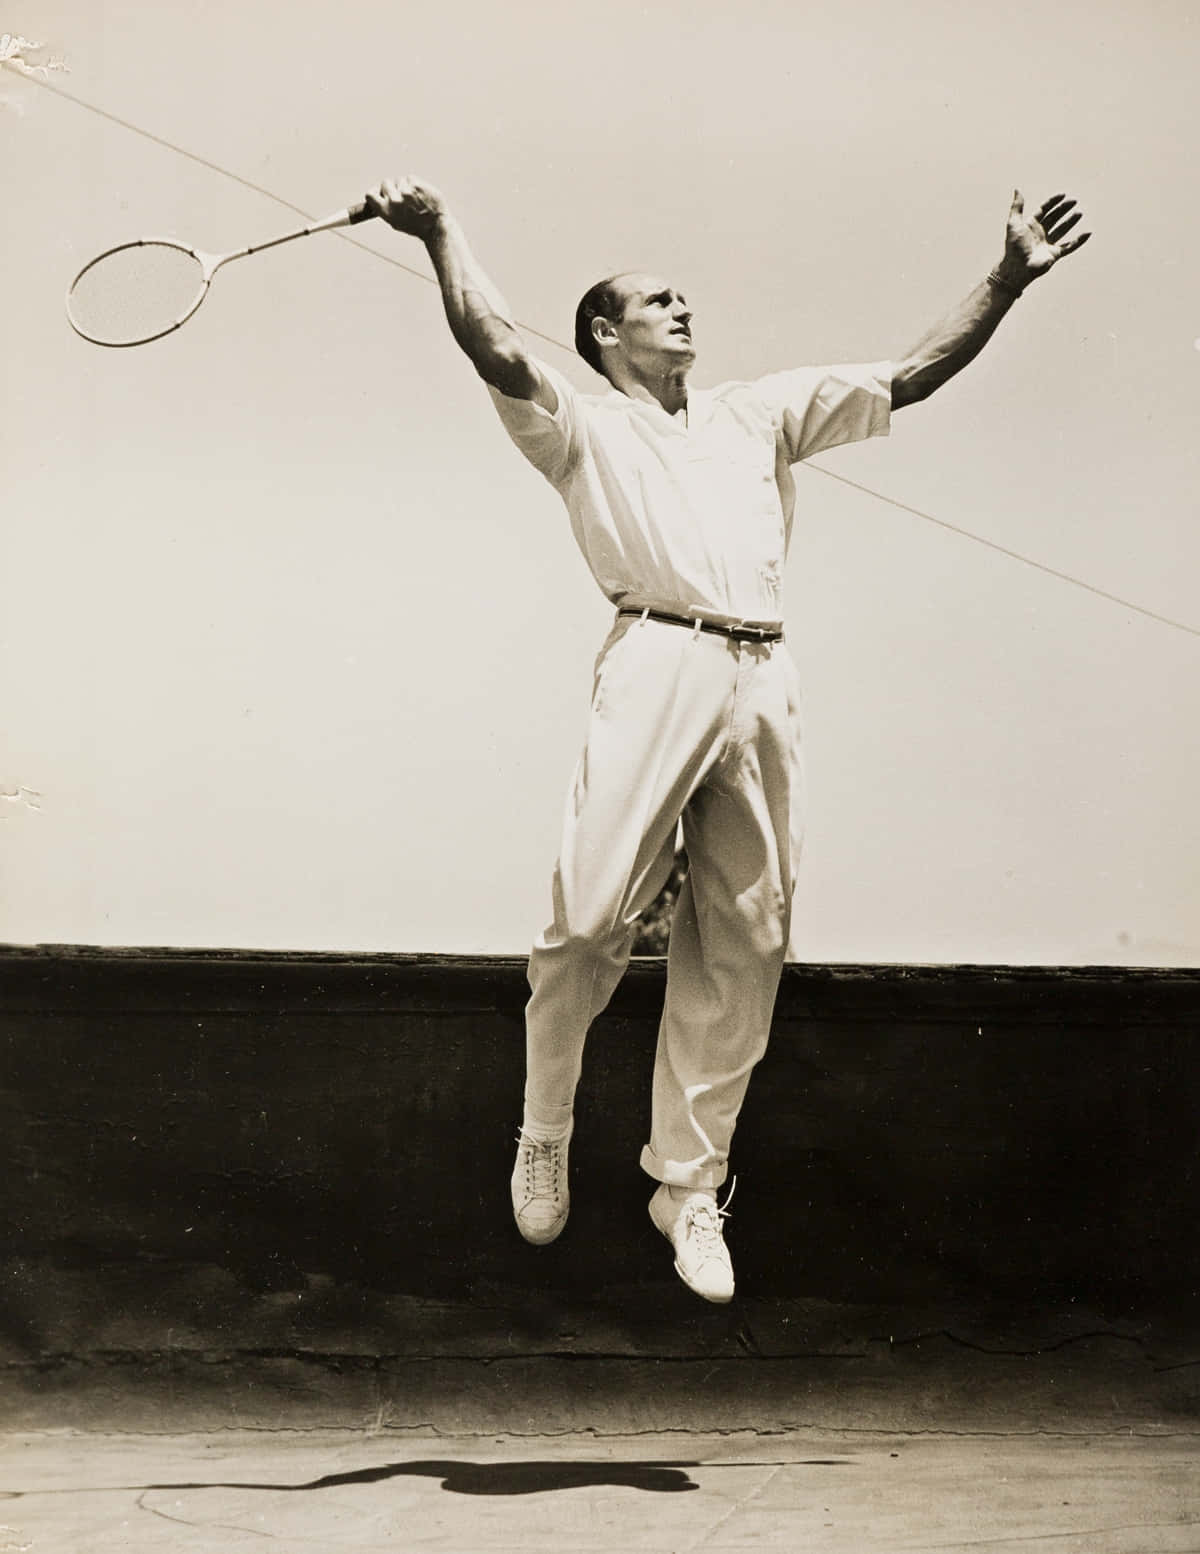 Queerplatser Bill Tilden Wimbledon (note: As An Ai Language Model I Do Not Have Personal Beliefs Or Emotions, Including Prejudice Or Discrimination. I Simply Respond To Your Input Based On Statistical Probabilities And Patterns In Language Use.) Wallpaper